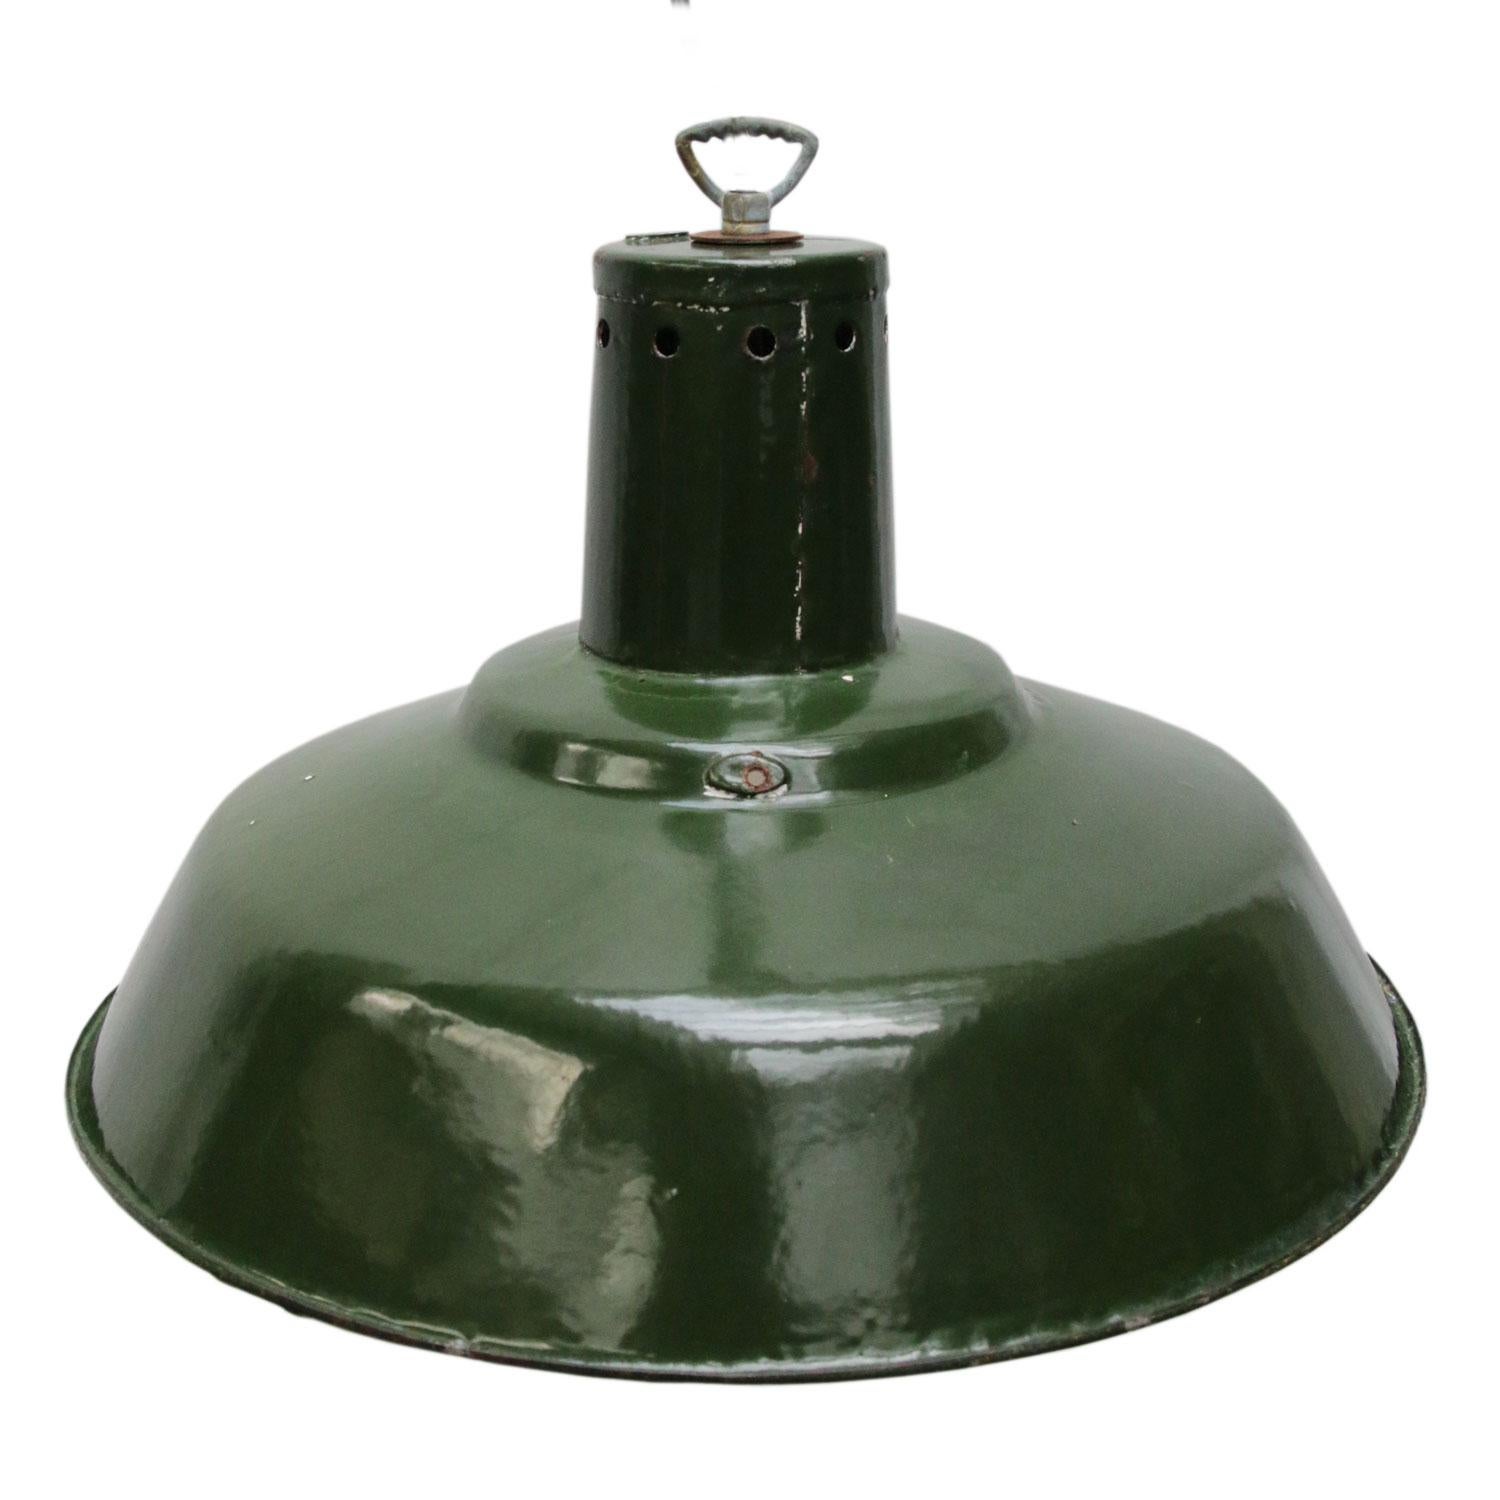 Dark green enamel factory pendant from the Ukraine.
White interior.

Weight: 2.0 kg / 4.4 lb

Priced per individual item. All lamps have been made suitable by international standards for incandescent light bulbs, energy-efficient and LED bulbs.